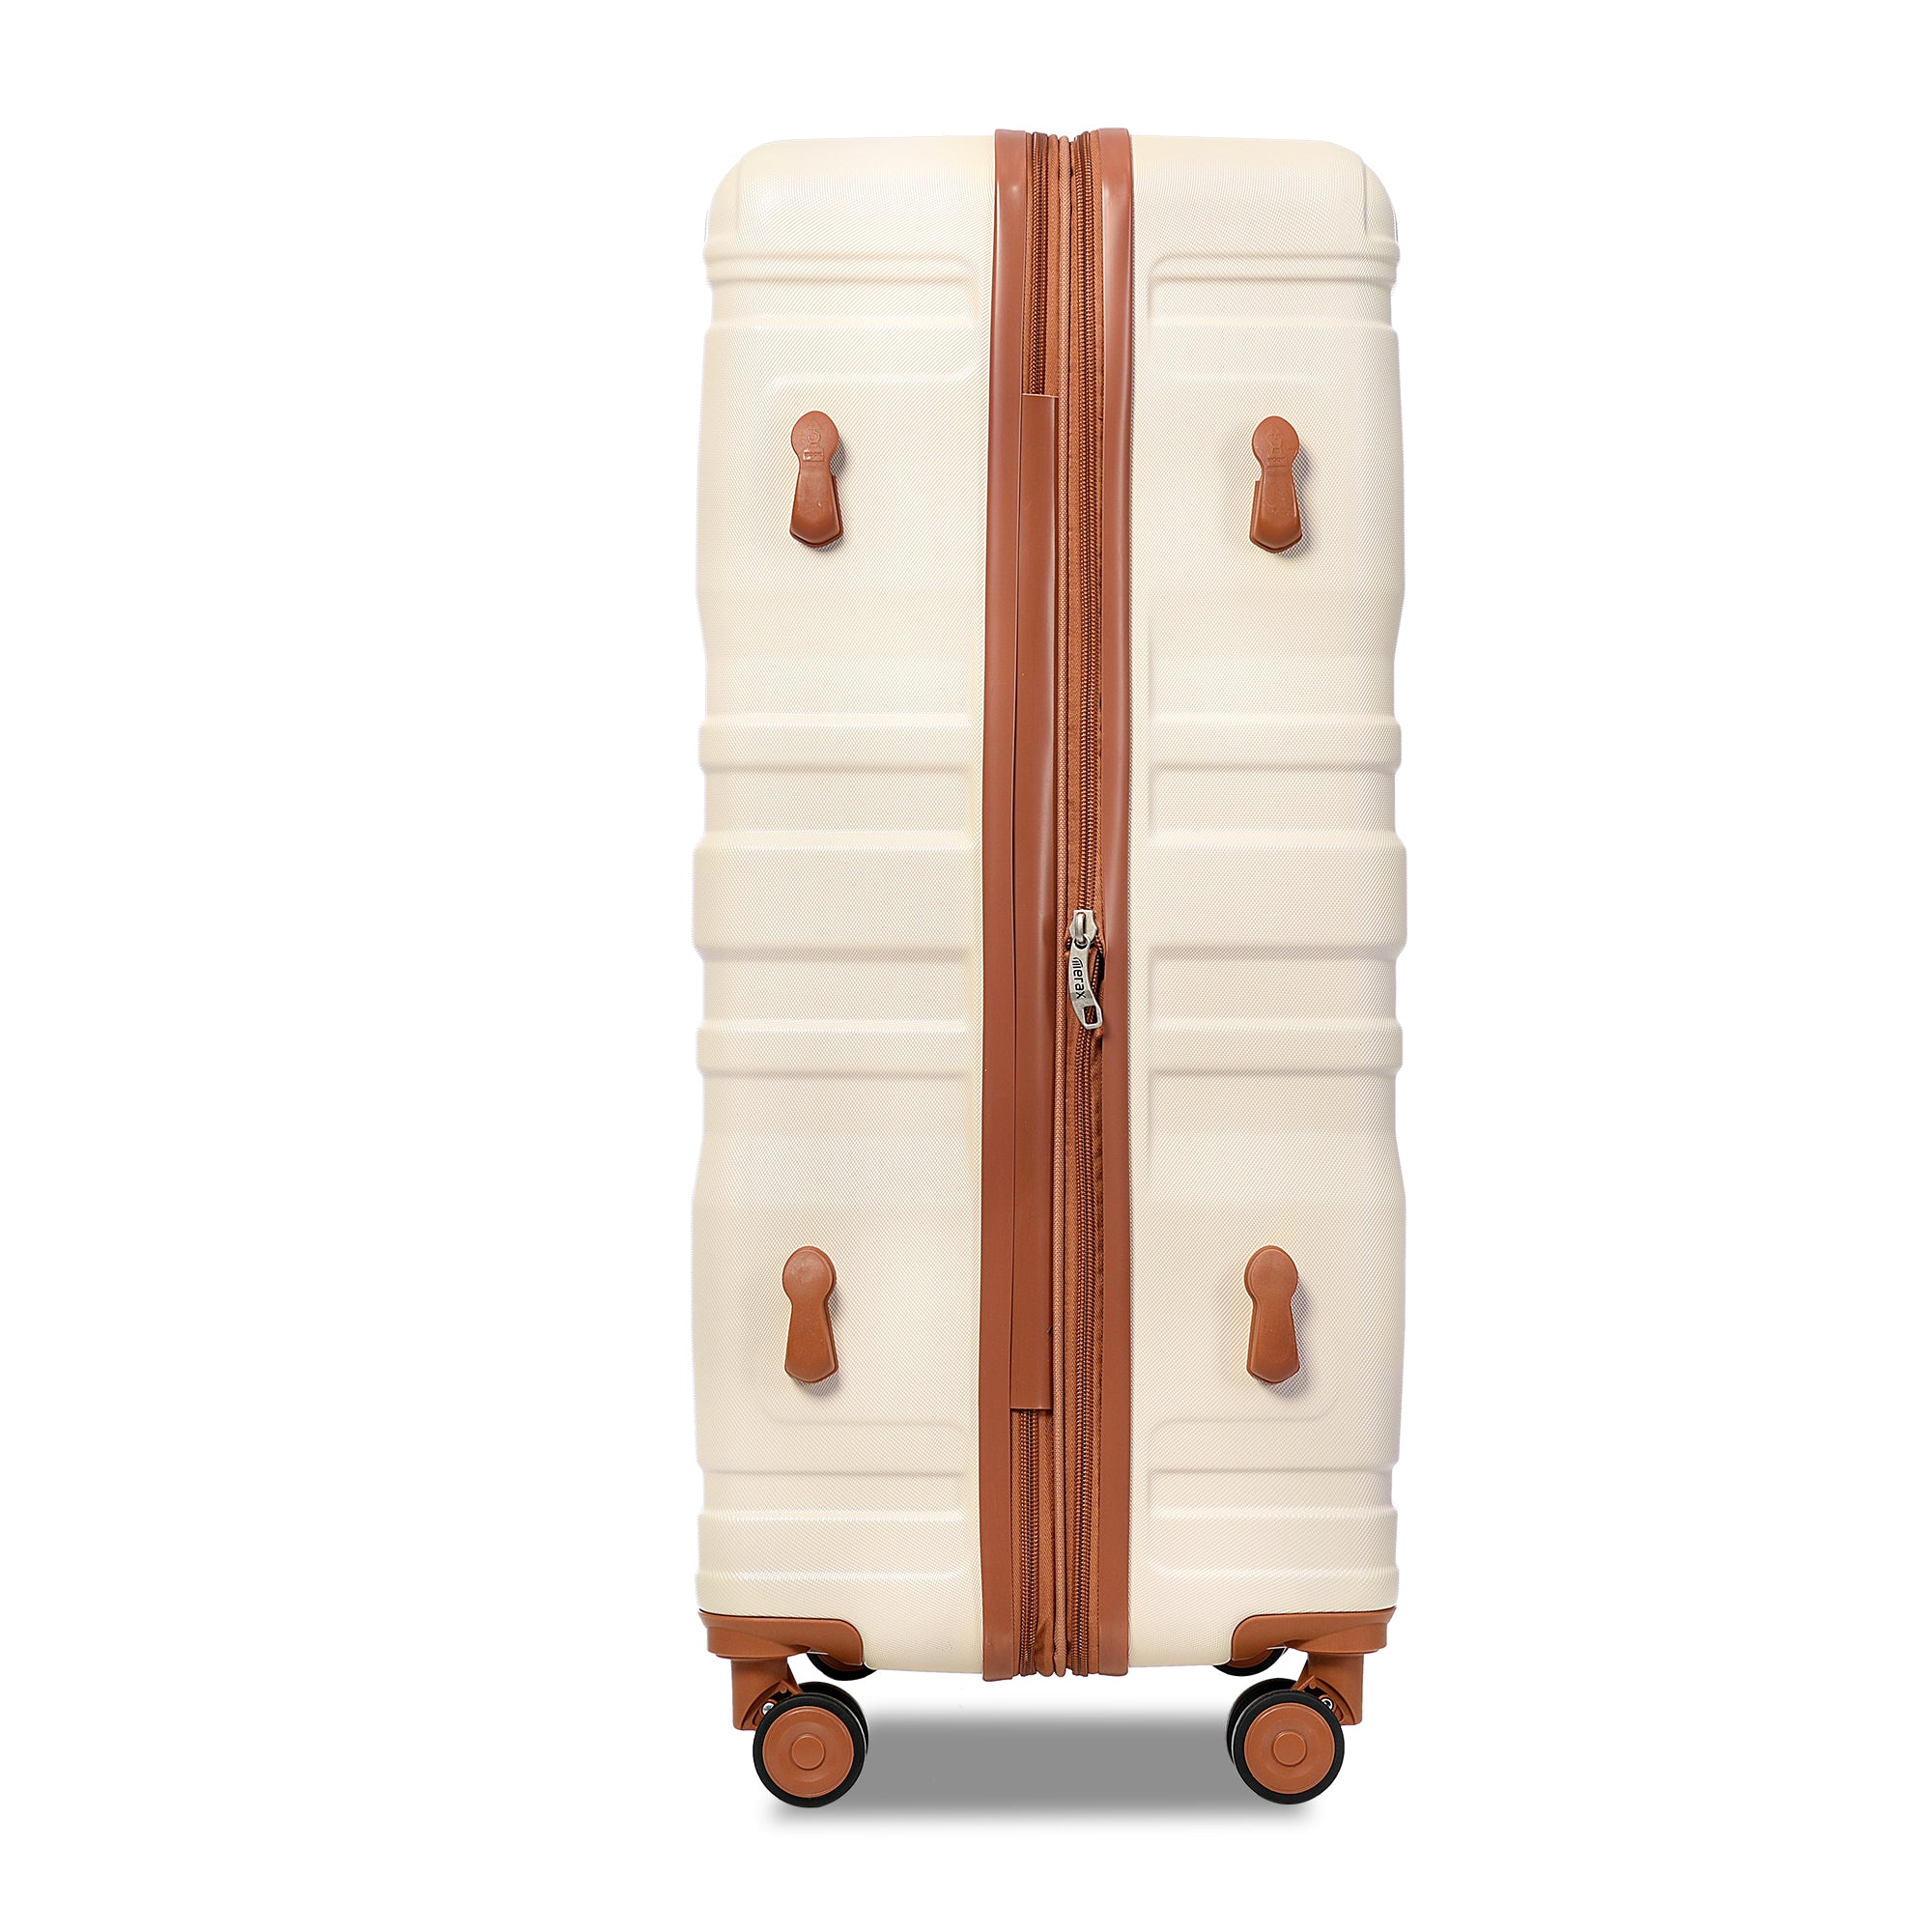 ZNTS Luggage Sets New Model Expandable ABS Hardshell 3pcs Clearance Luggage Hardside Lightweight Durable PP291792AAO